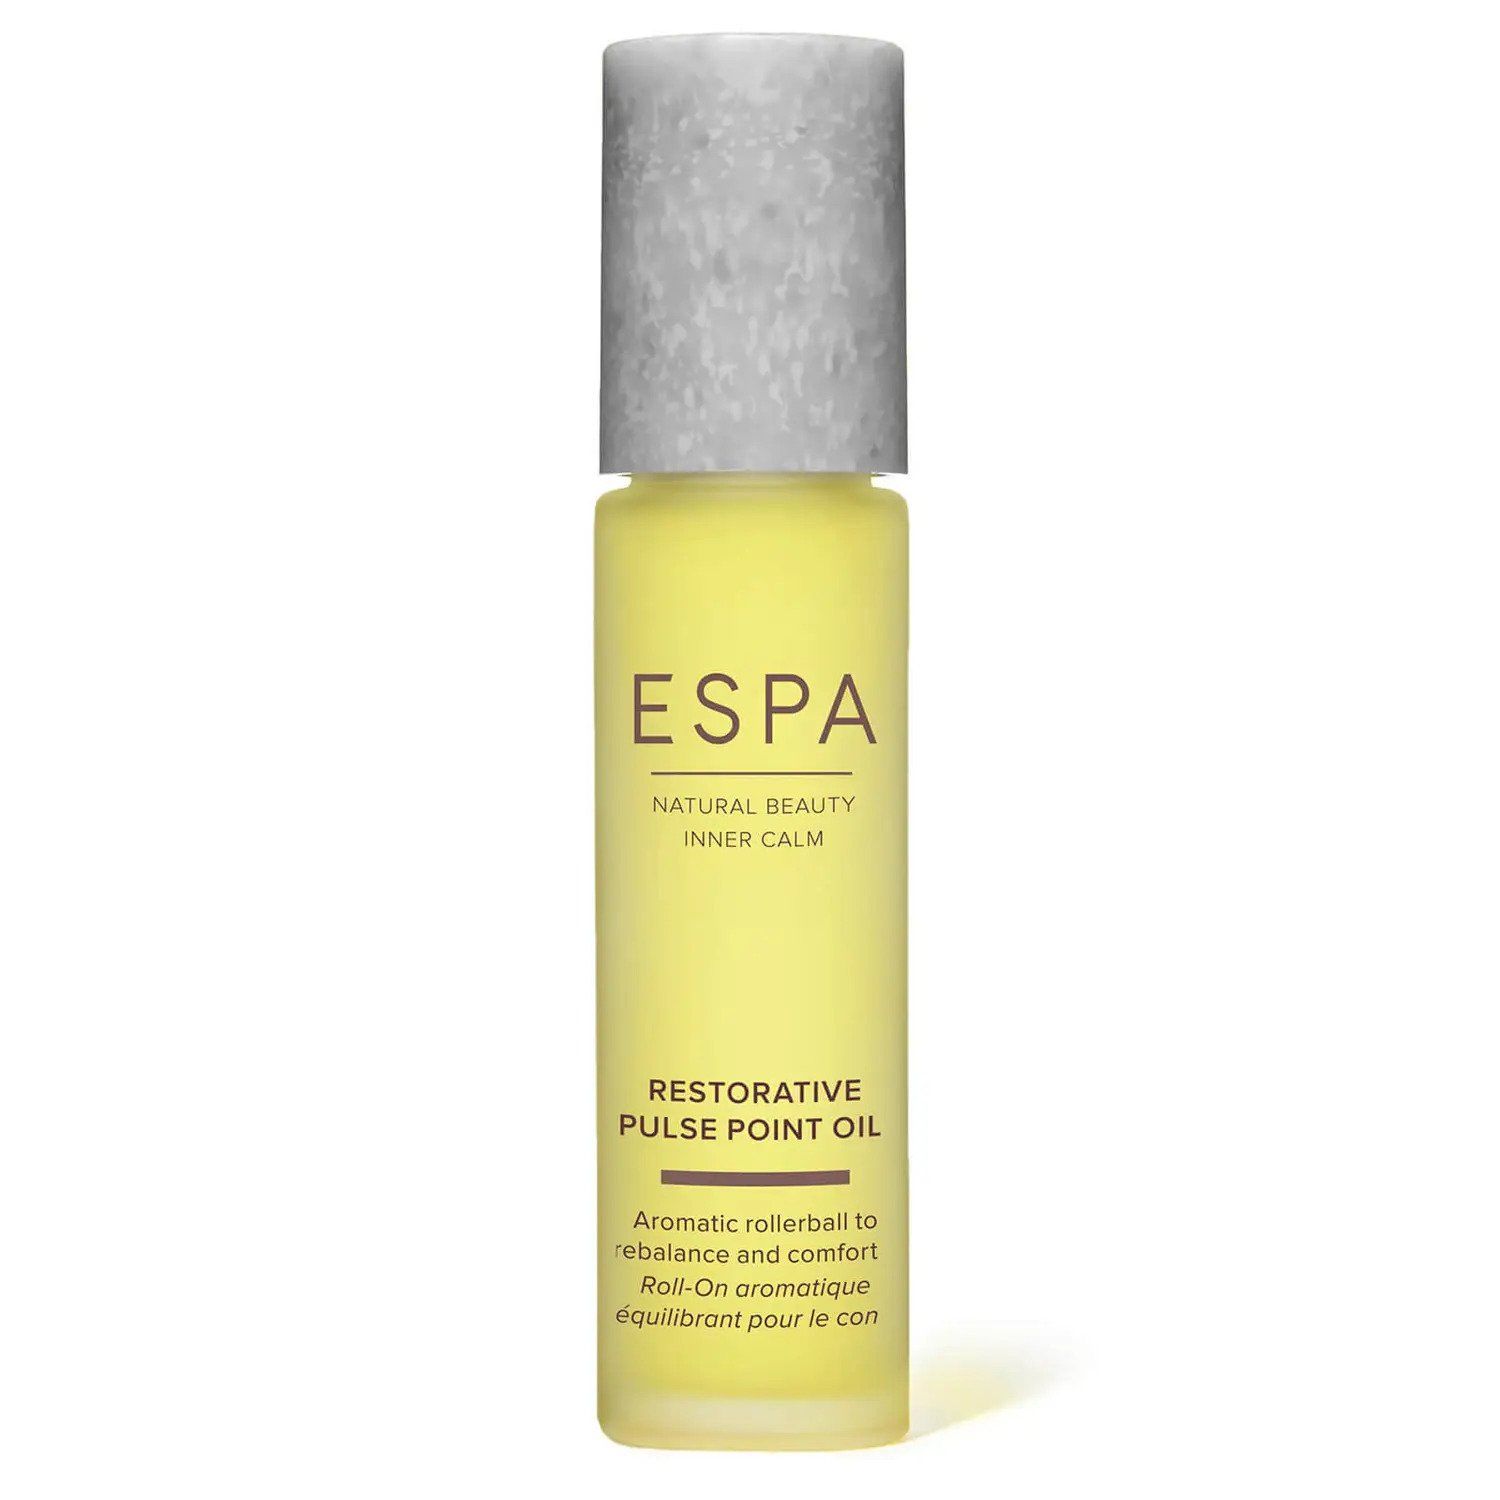 Rejuvenate your senses with the ESPA Restorative Pulse Point Oil. This comforting blend promotes a re-balancing effect, perfect for those with busy schedules who are always on the go. Formulated with a blend of carefully selected ingredients, the scented roll-on boasts aromatherapy benefits to help restore a sense of calm, peace and tranquillity. Carefully blended with Sweet Orange, Rose Geranium and Lavender to help create a feeling of calm. The addition of Palmarosa helps restore the senses.